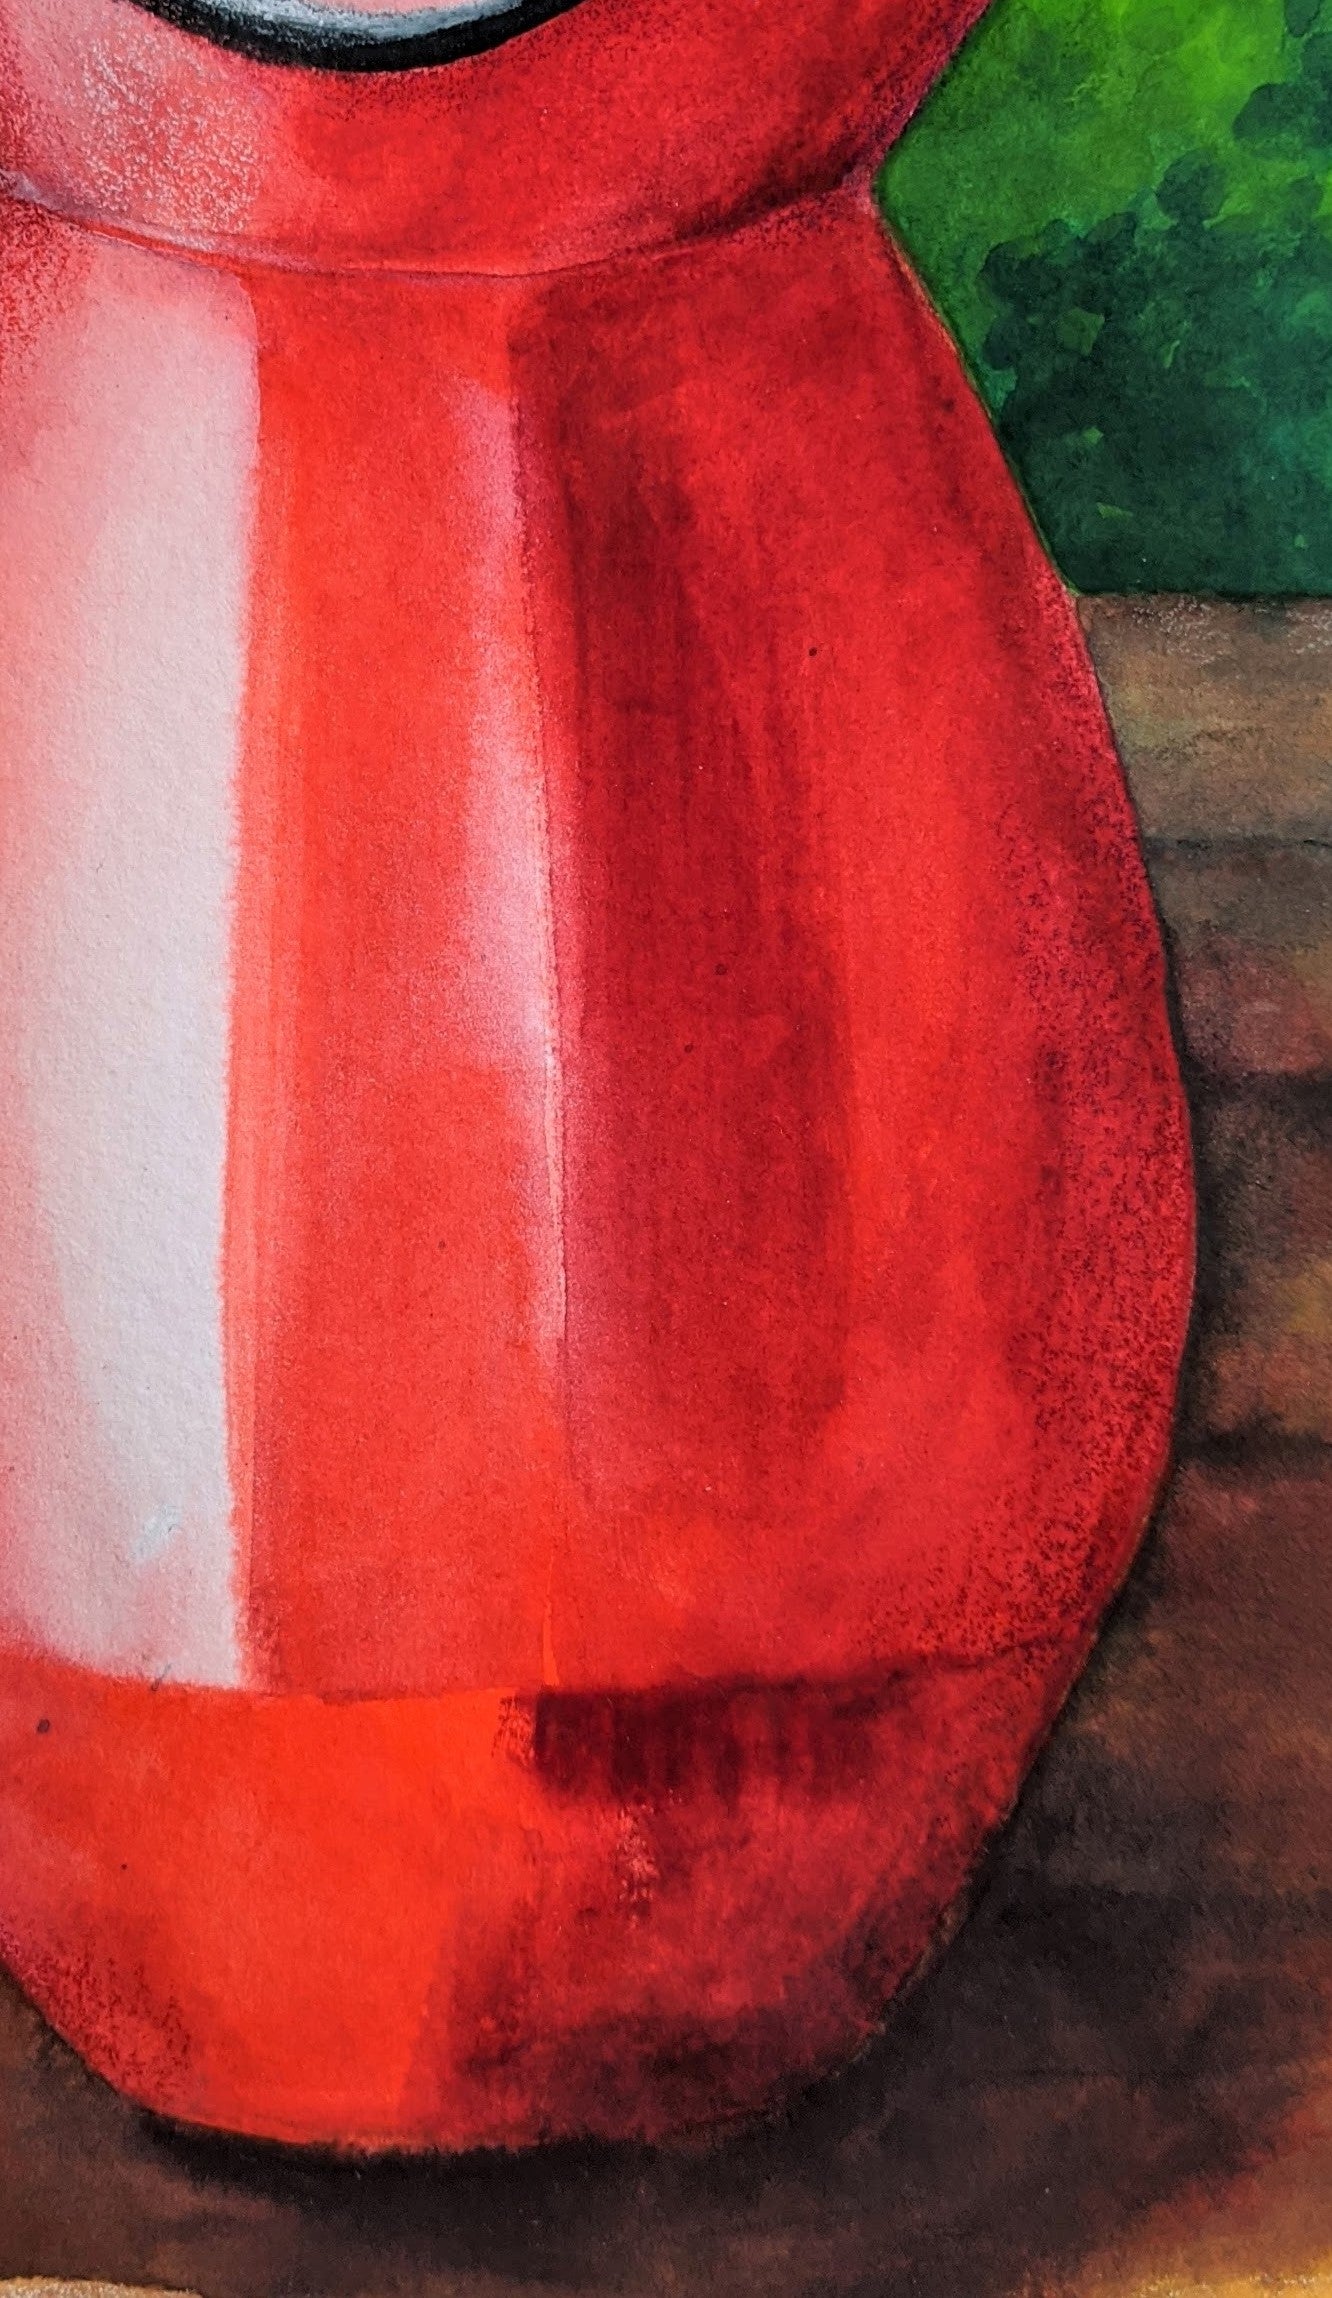 Red Pitcher gouache on paper painting detail